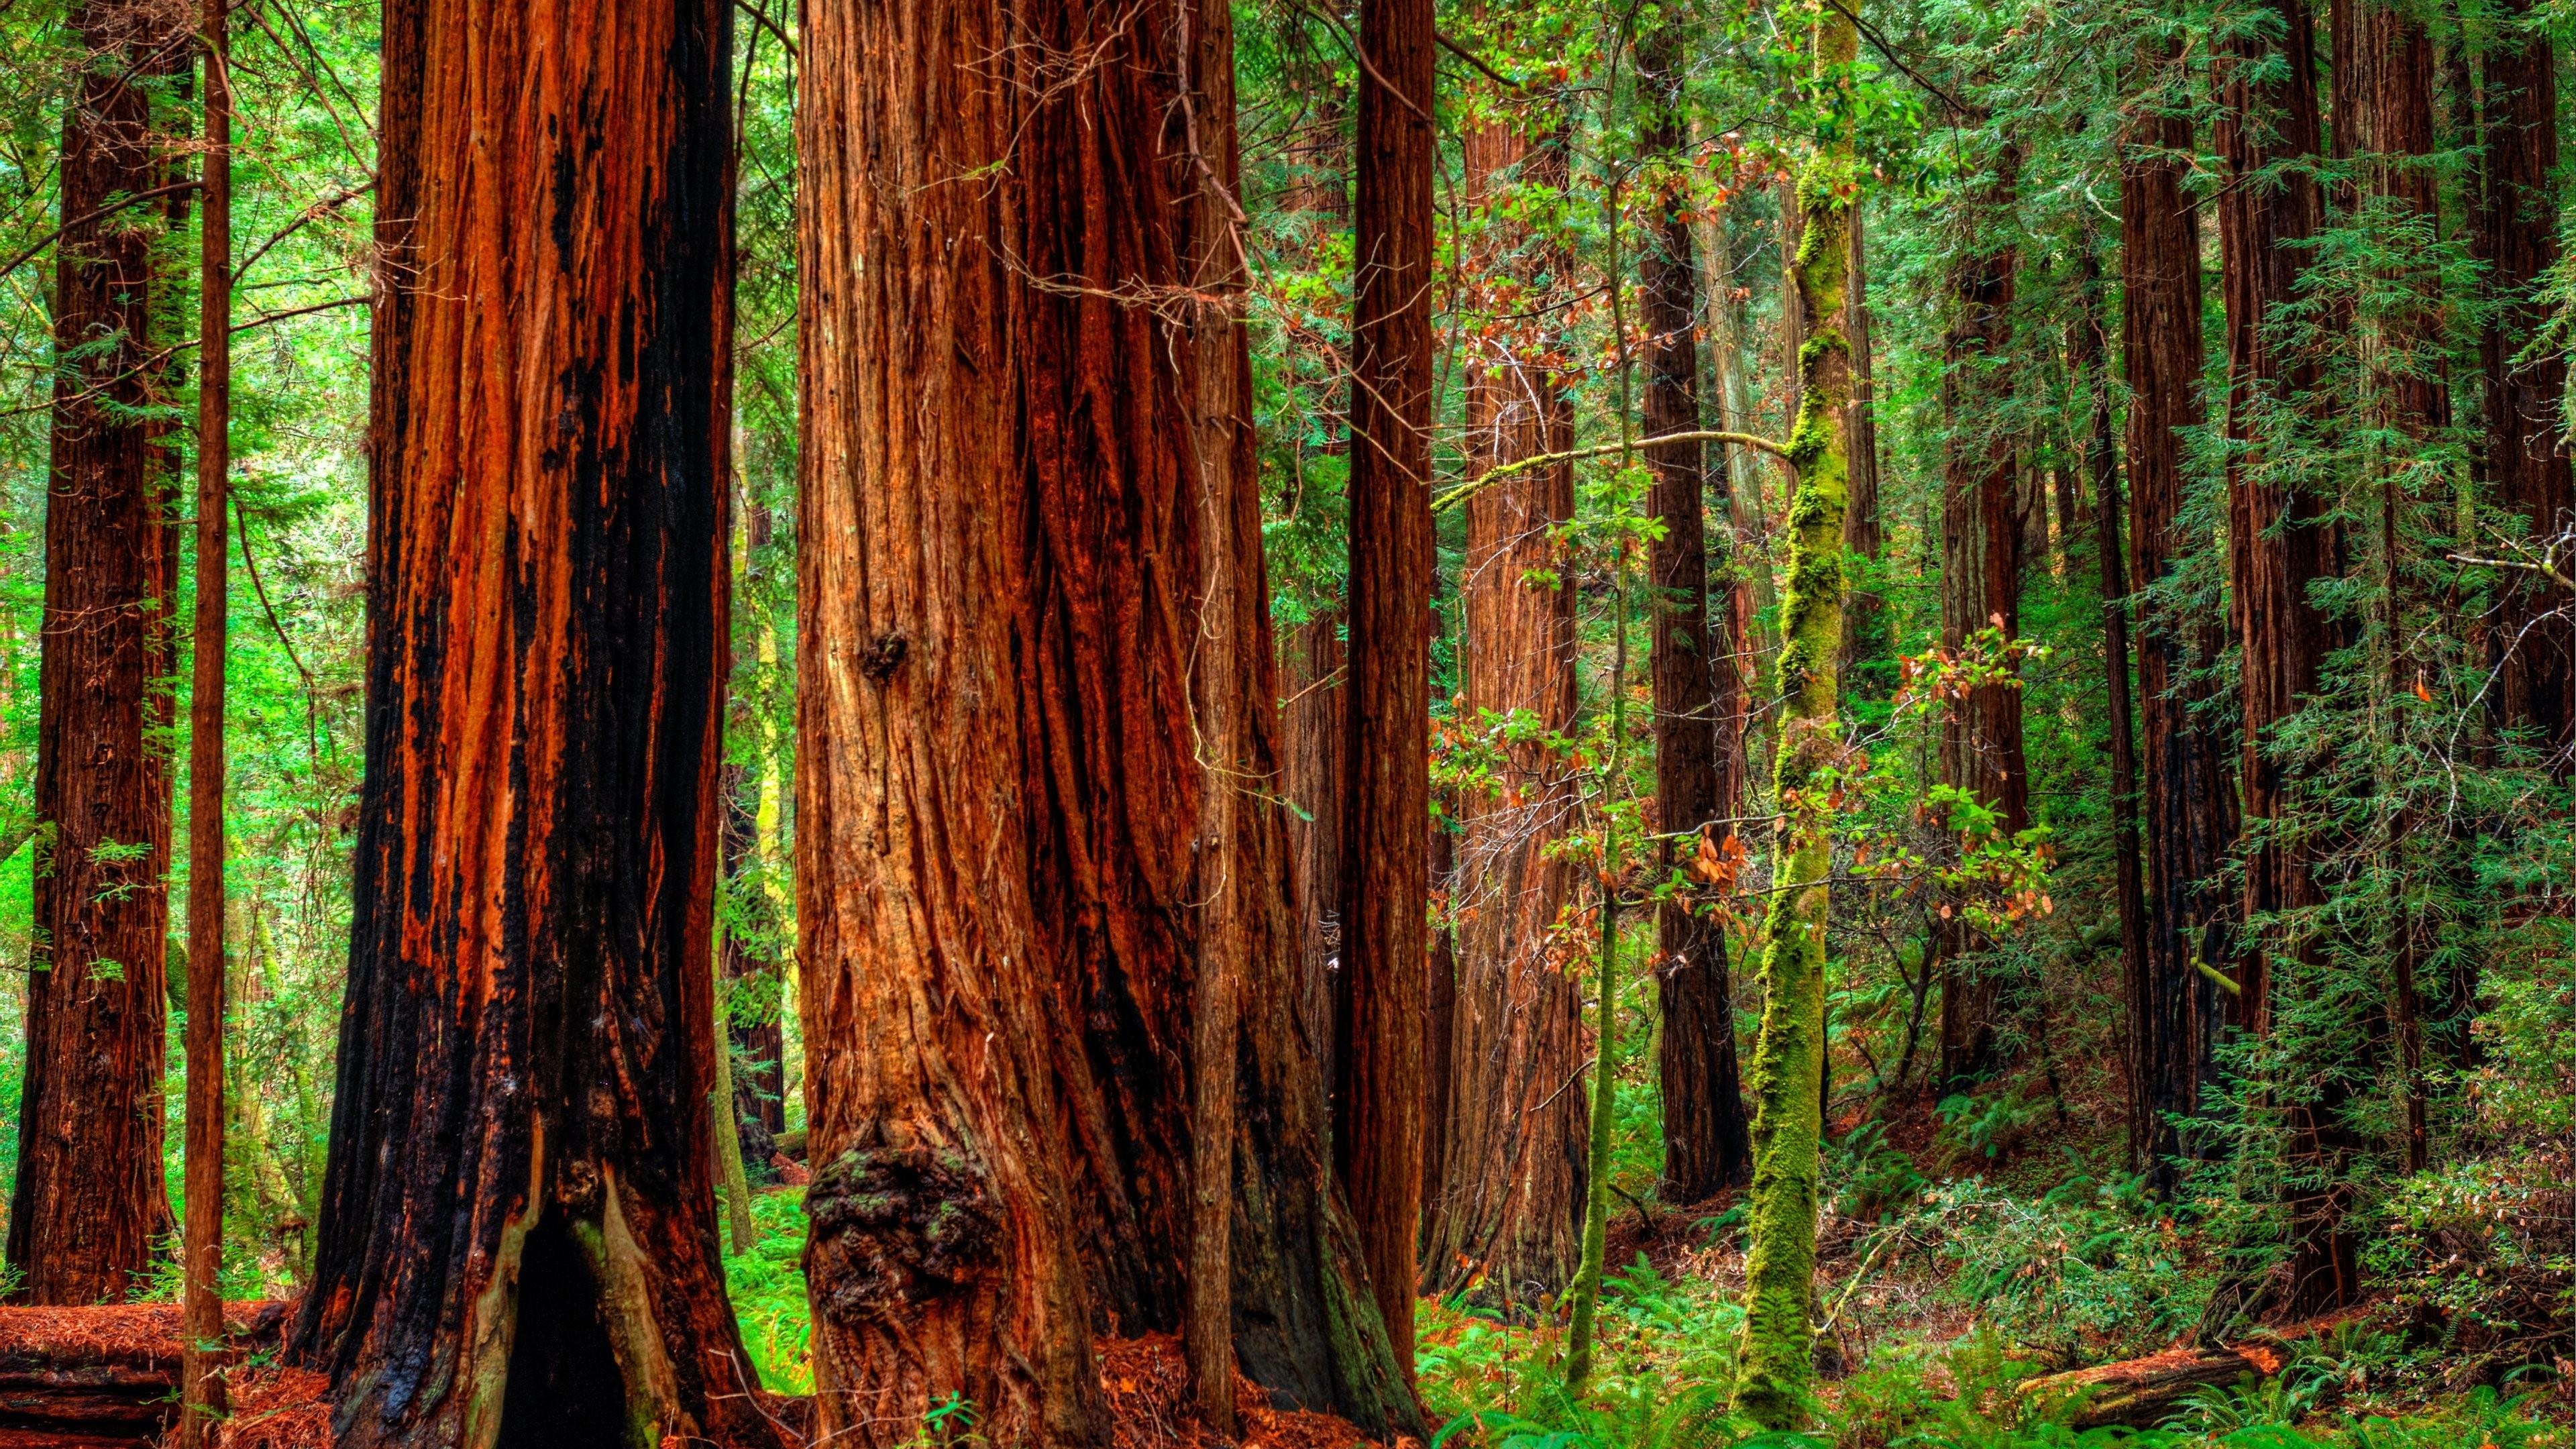 Redwood national and state parks, Wilderness sanctuary, Nature's playground, Outdoor adventures, 3840x2160 4K Desktop